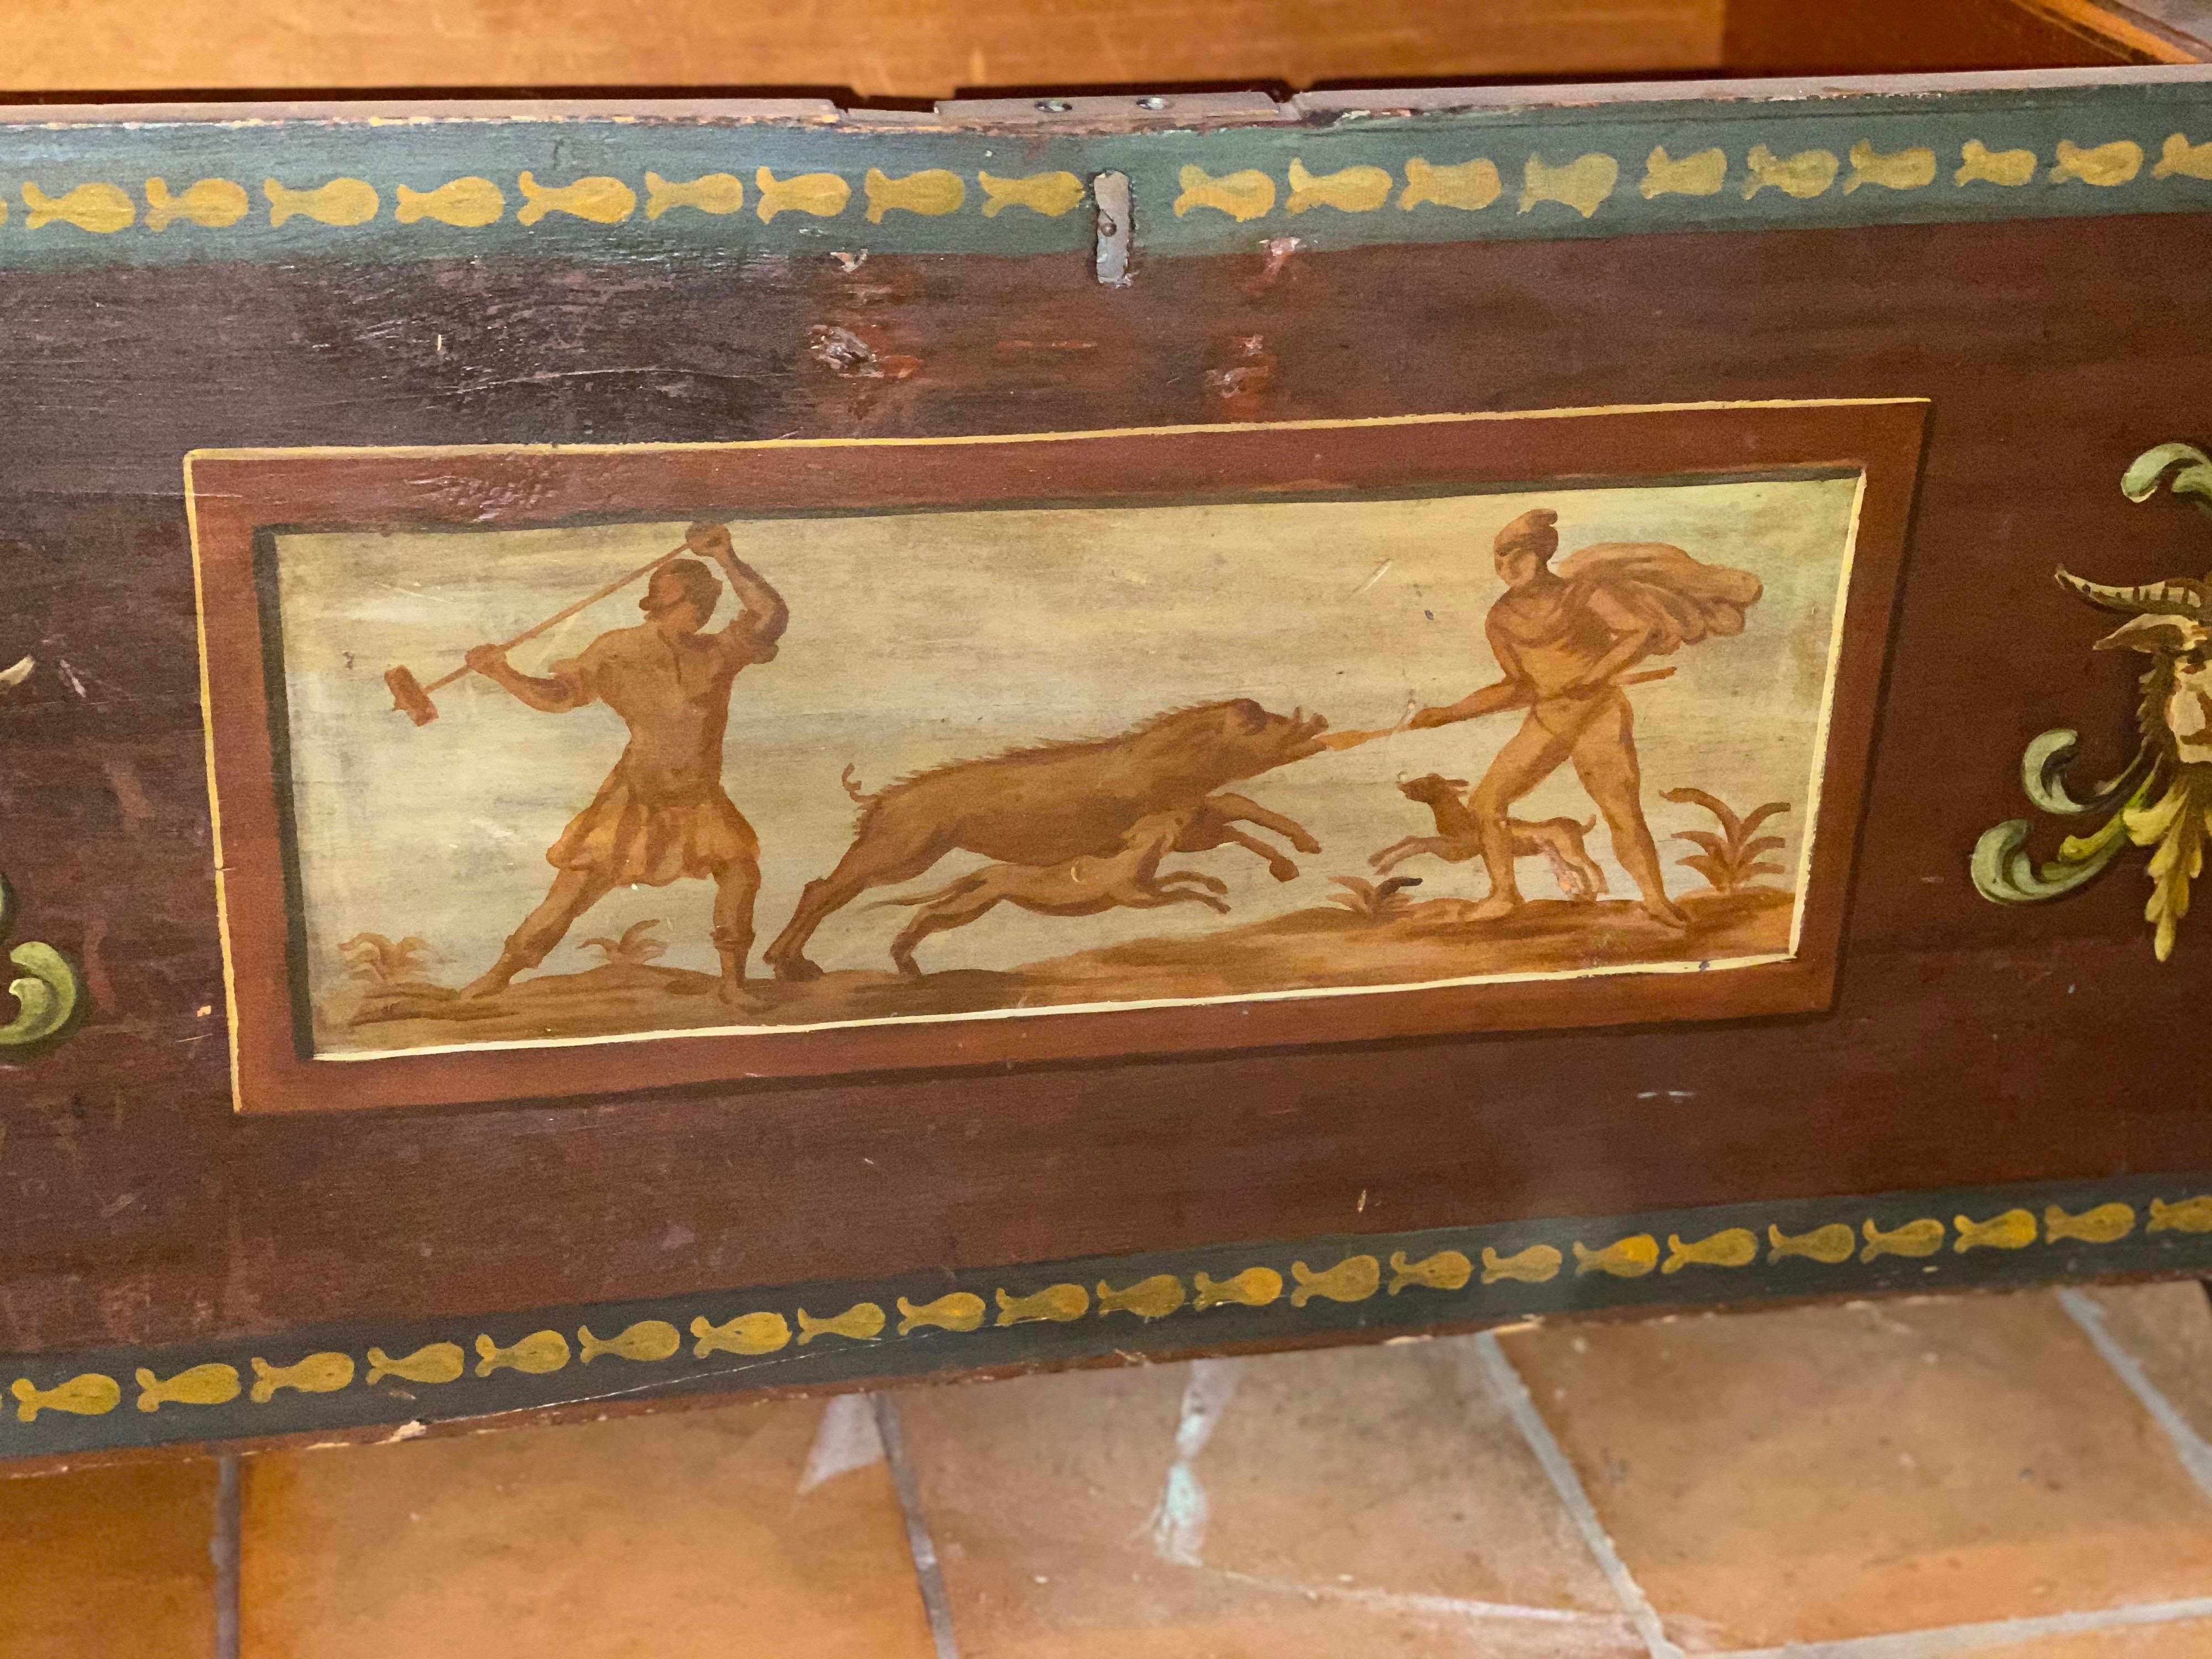 A continental painted wood trunk
Late 19th-early 20th century
With neoclassic motifs and figural reserves
Measures: 24 in. high, 44 in. wide, 19 in. deep
Fading and discoloration, some surface wear
Separation at the seams of frame, splitting on